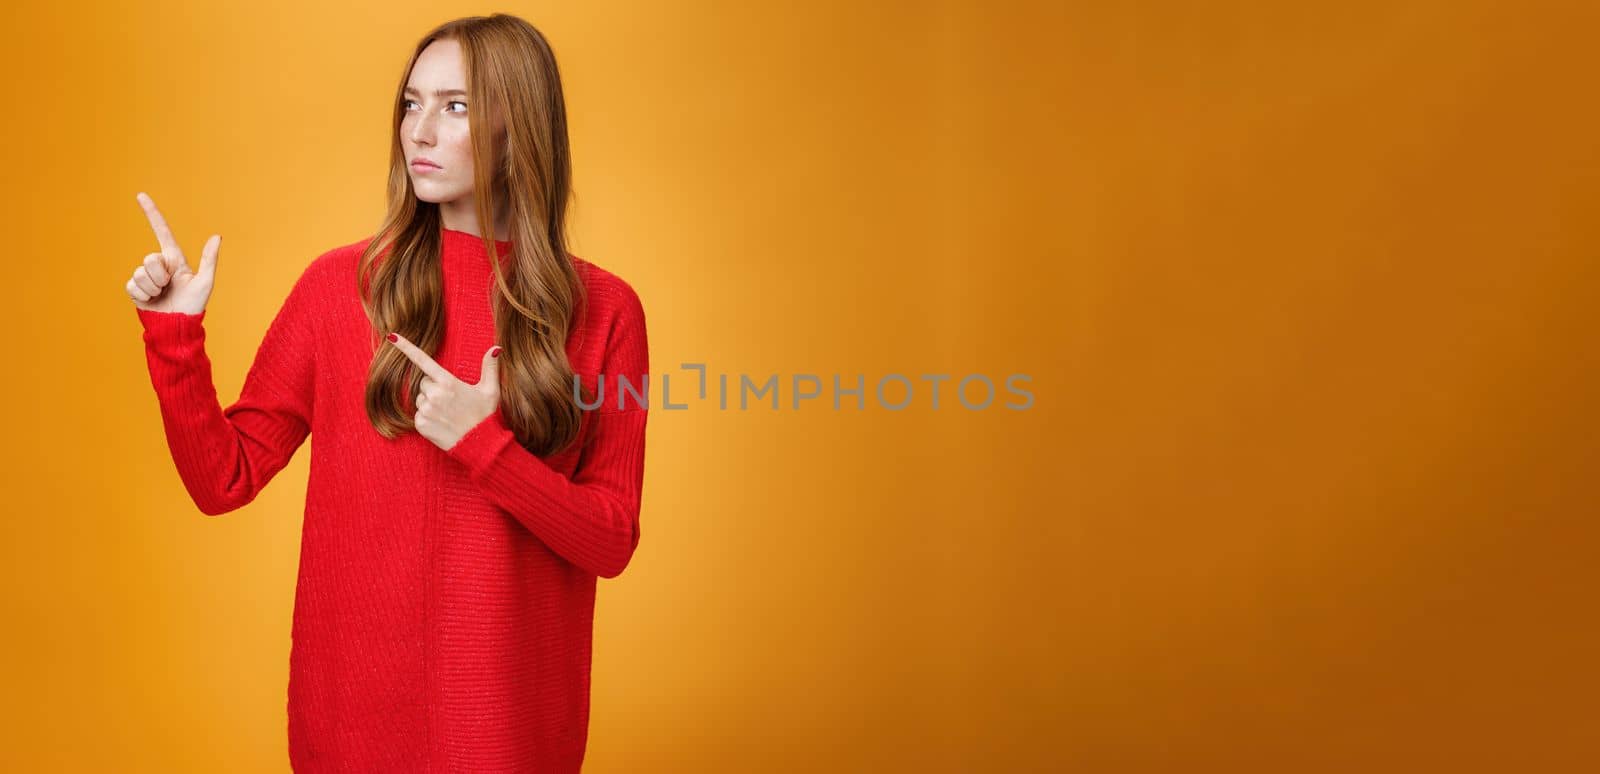 Studio shot of suspicious serious-looking unsure redhead girl frowning looking and pointing at upper left corner with doubtful strict gaze posing uncertain over orange background. Copy space